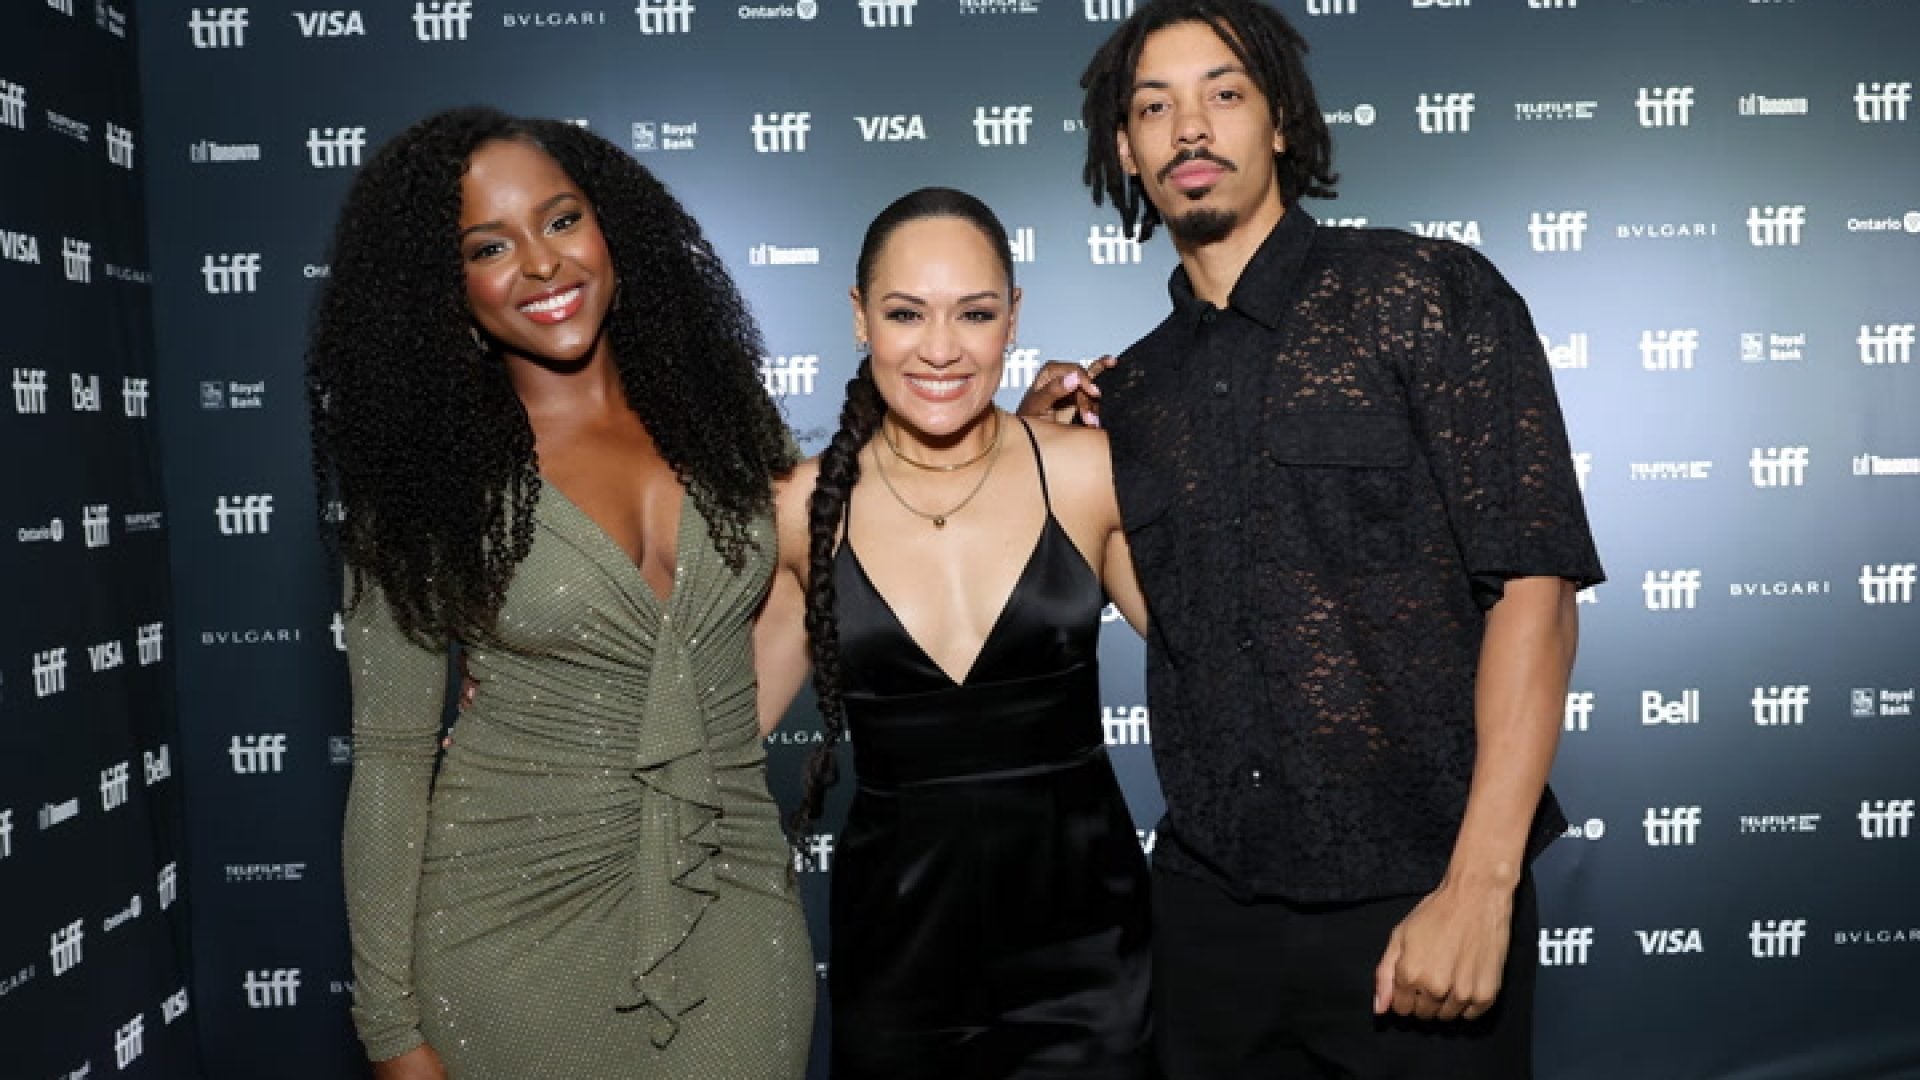 WATCH: The Cast of 'The Blackening' Reveals What Would Get Their "Black Card" Revoked